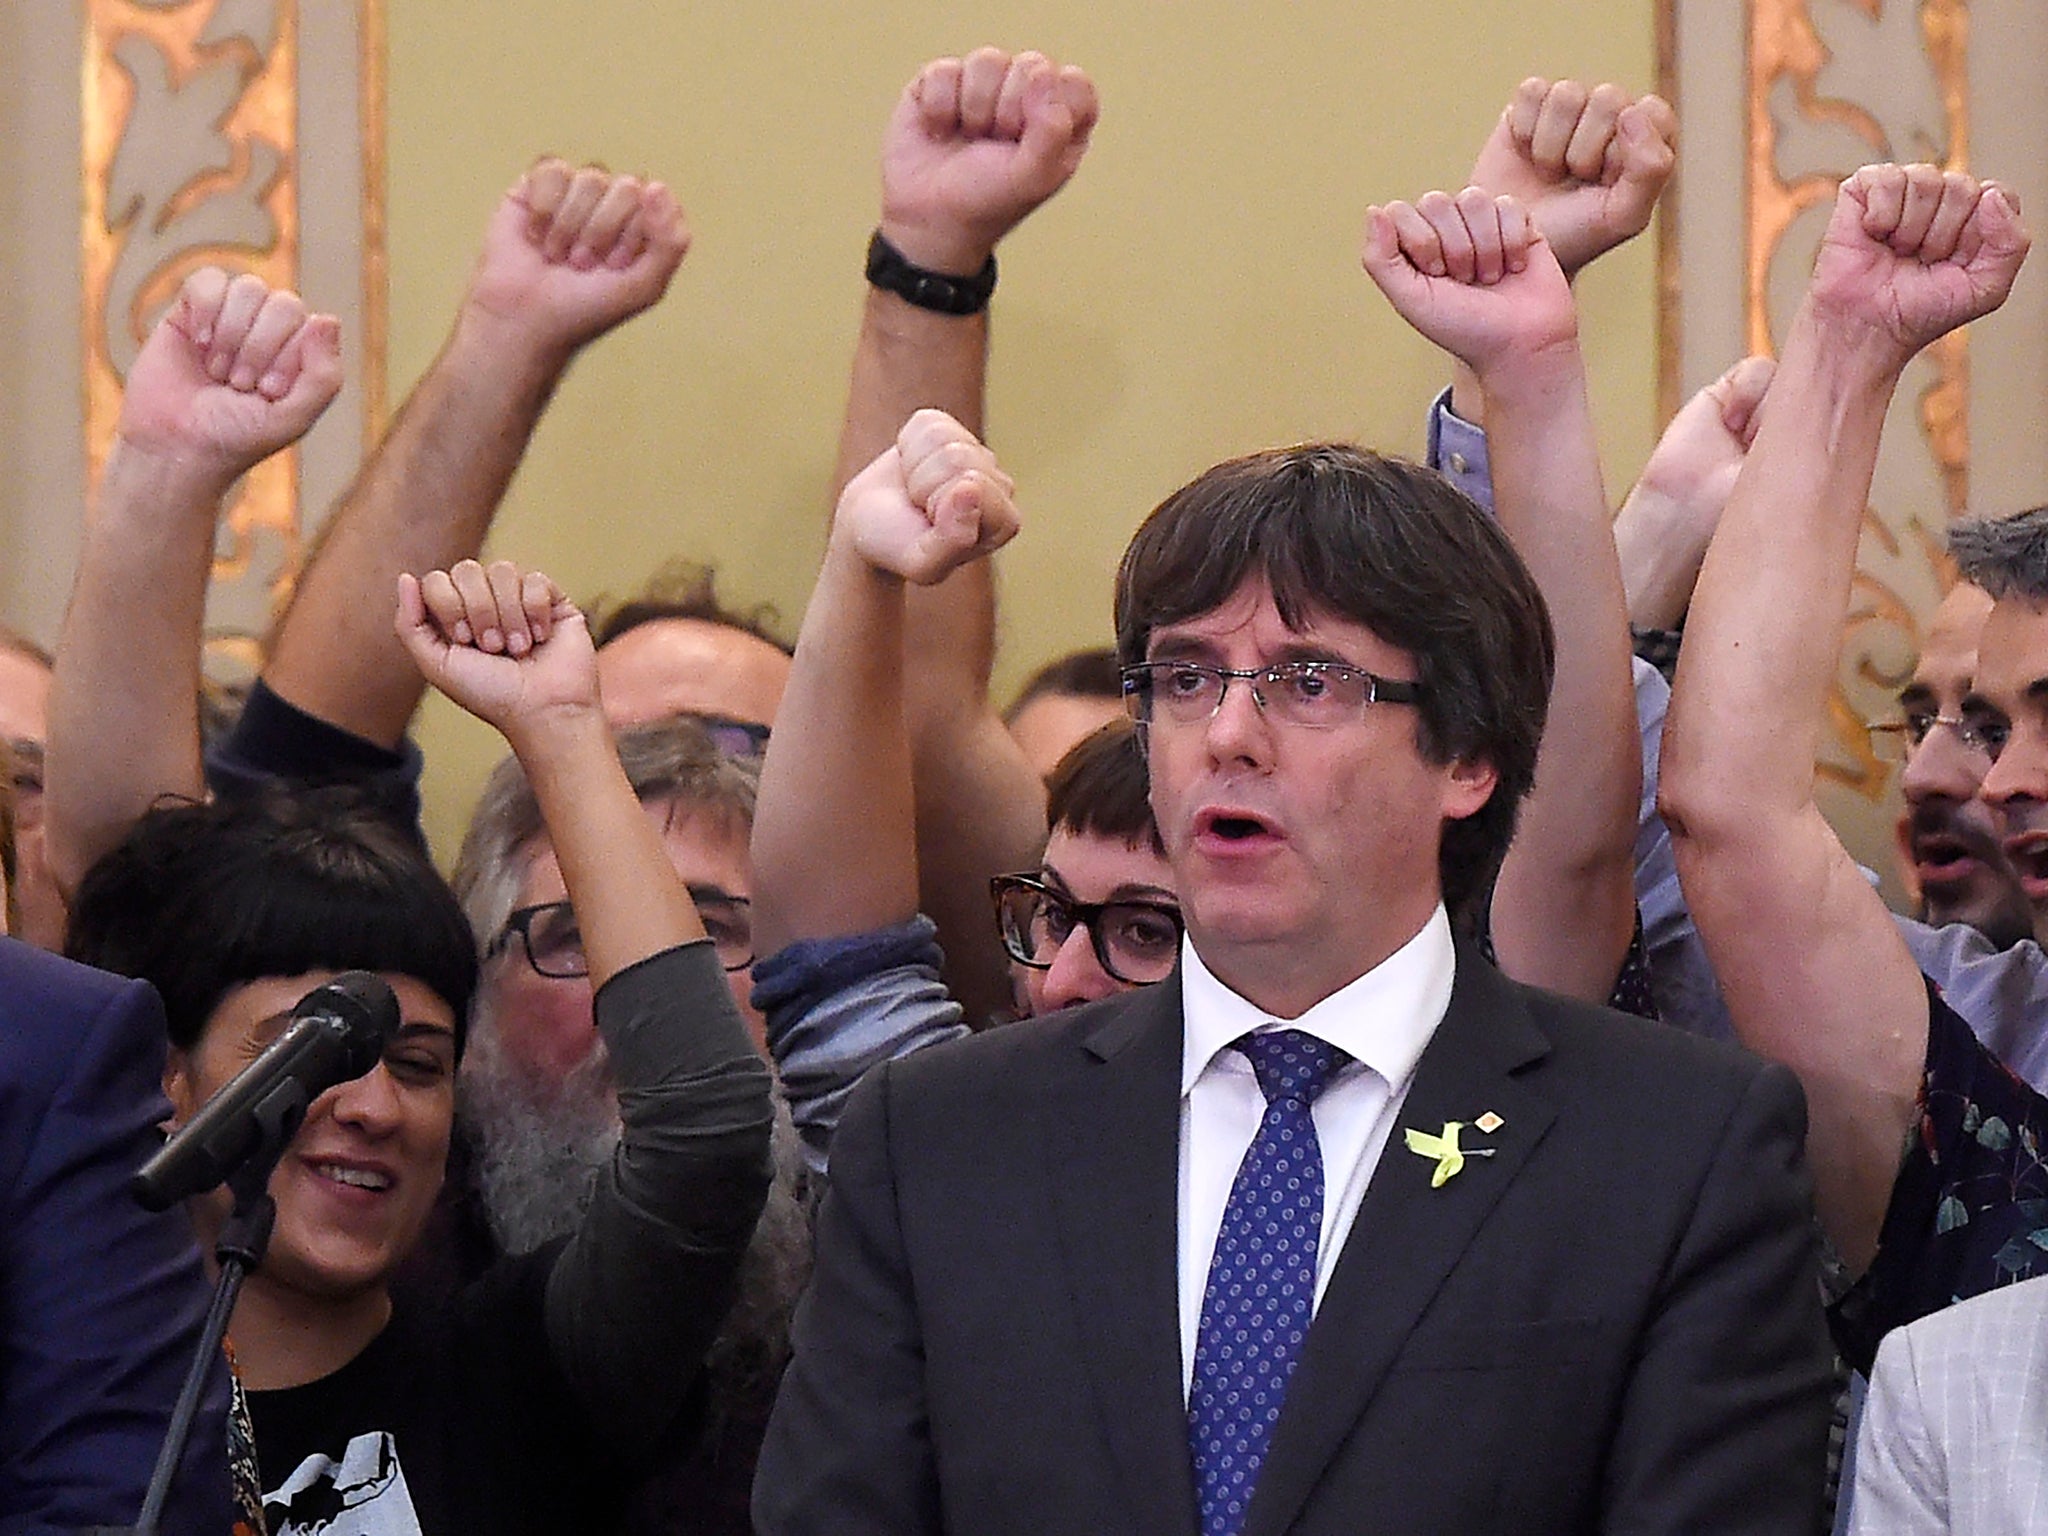 Catalan president Carles Puigdemont sings the Catalan anthem after parliamentary session last week